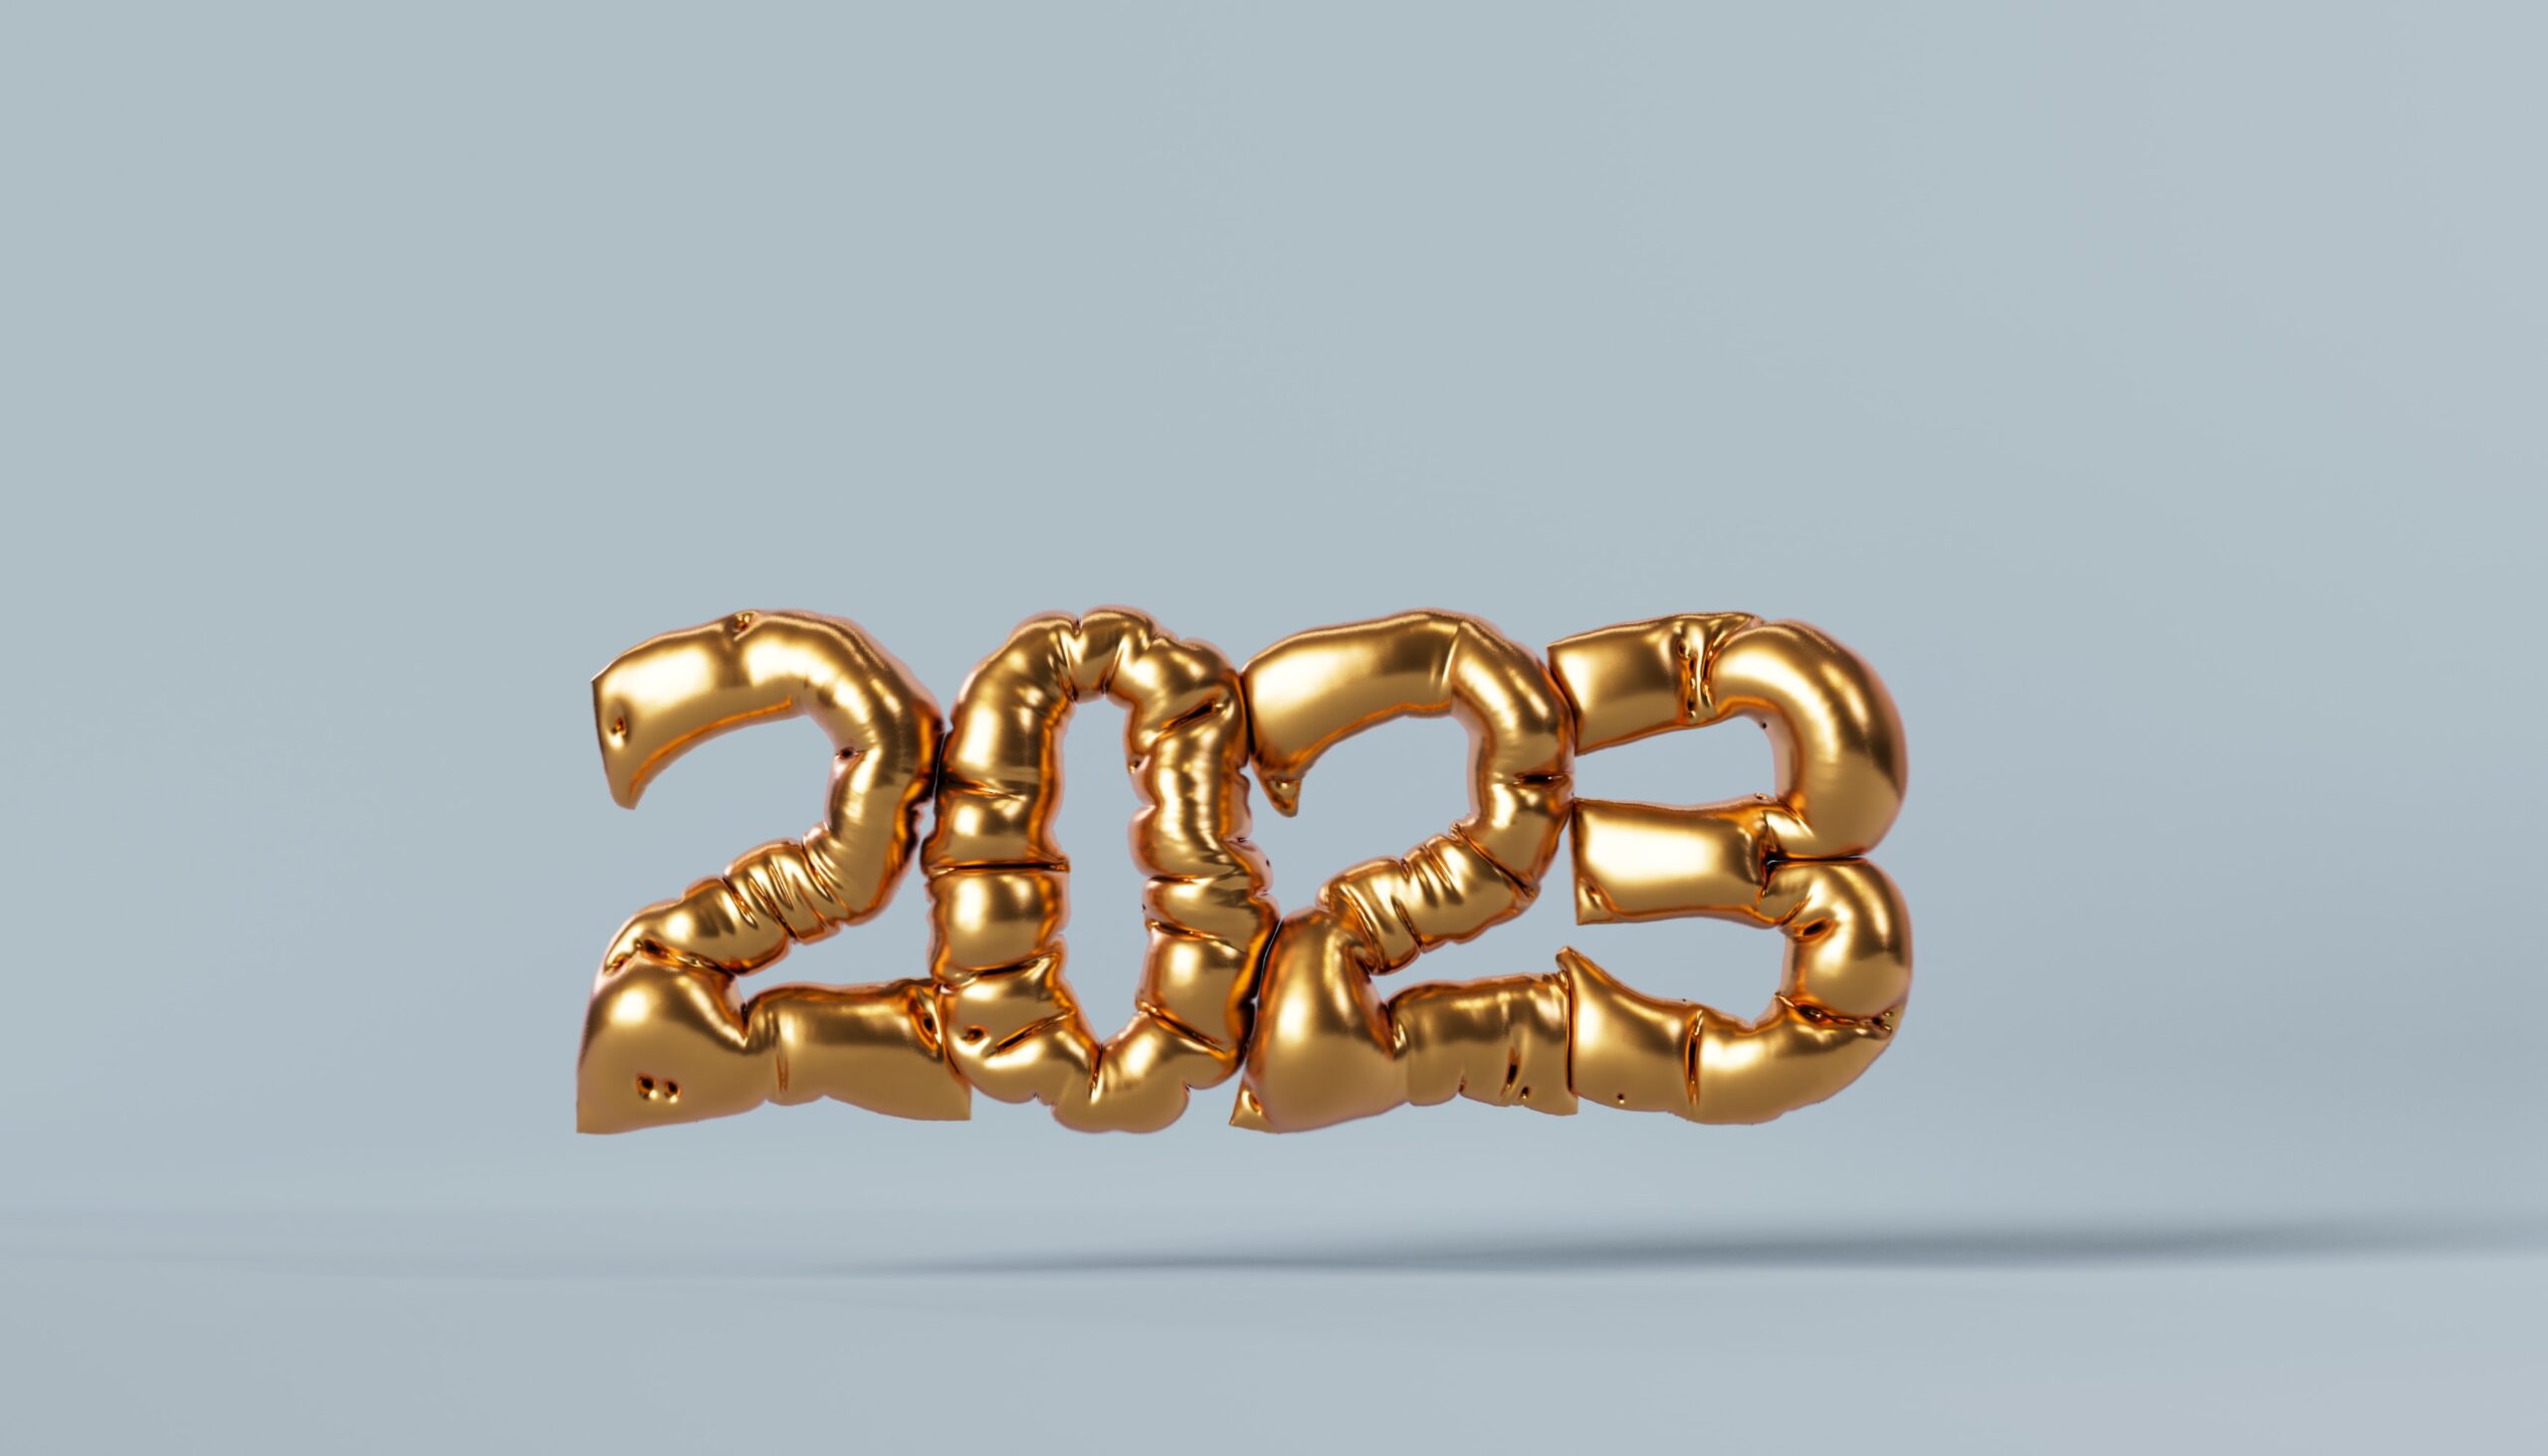 The number 2023 inflated in gold balloons